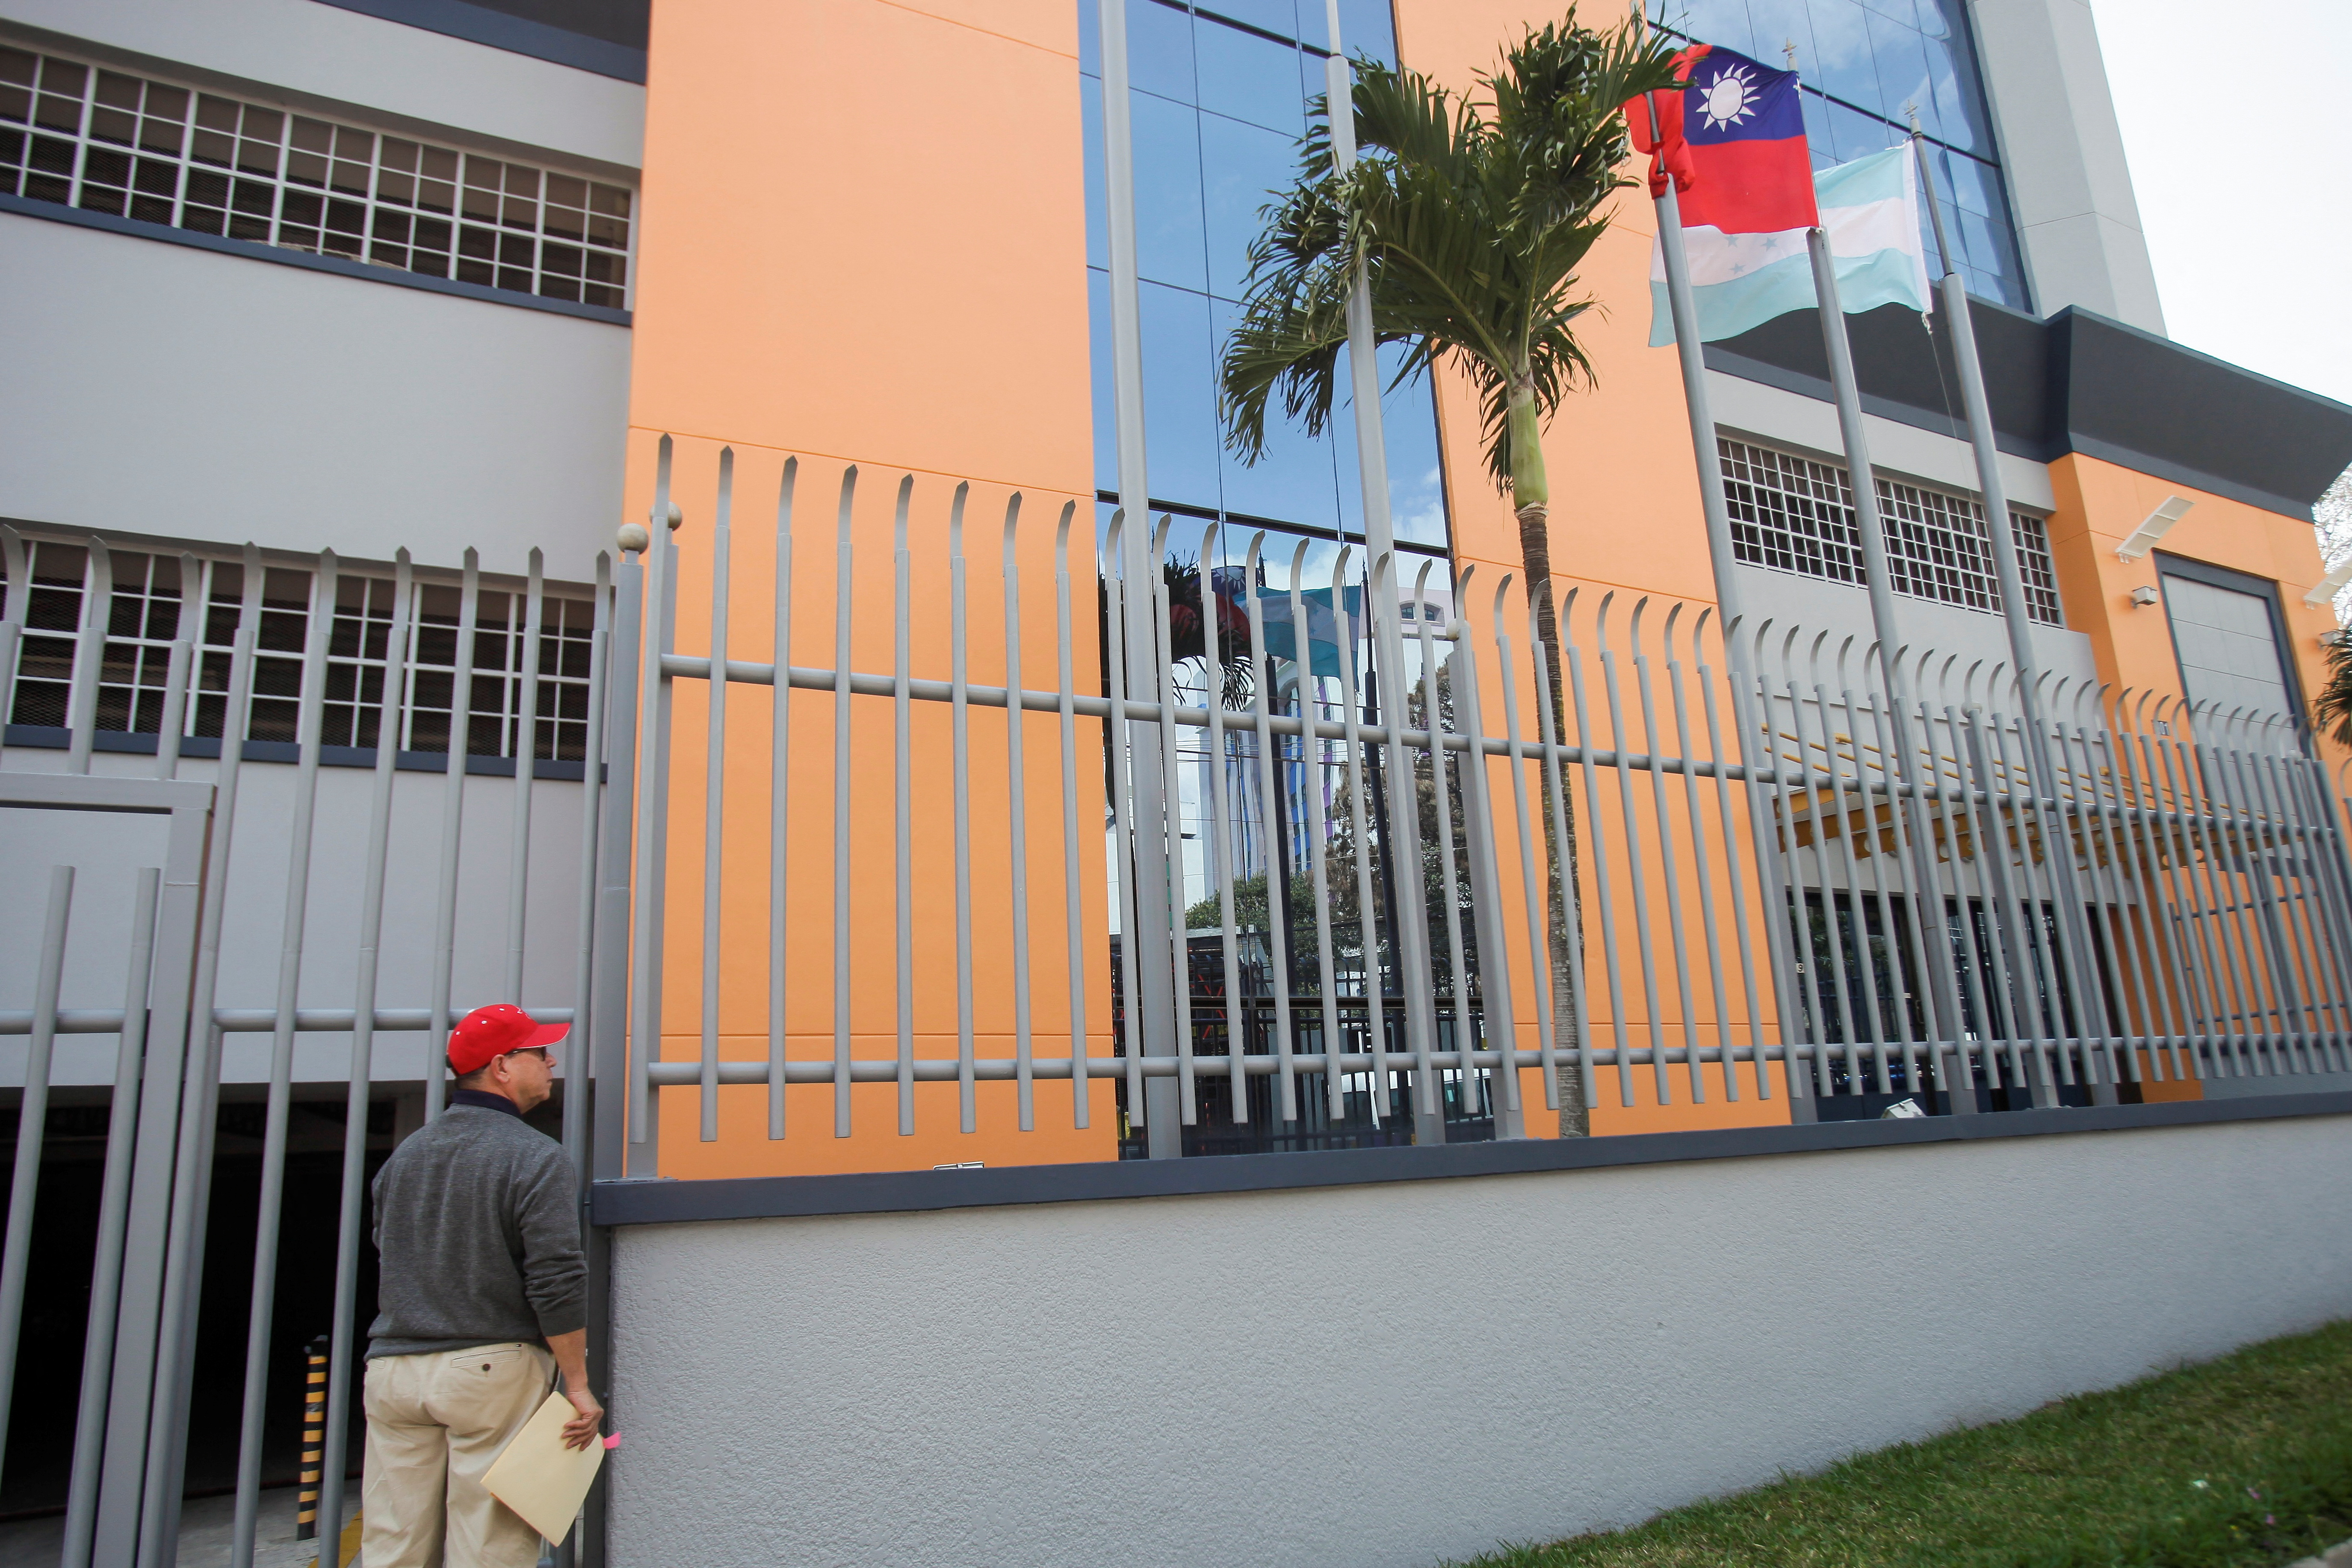 A man arrives to the Taiwan Embassy in Tegucigalpa